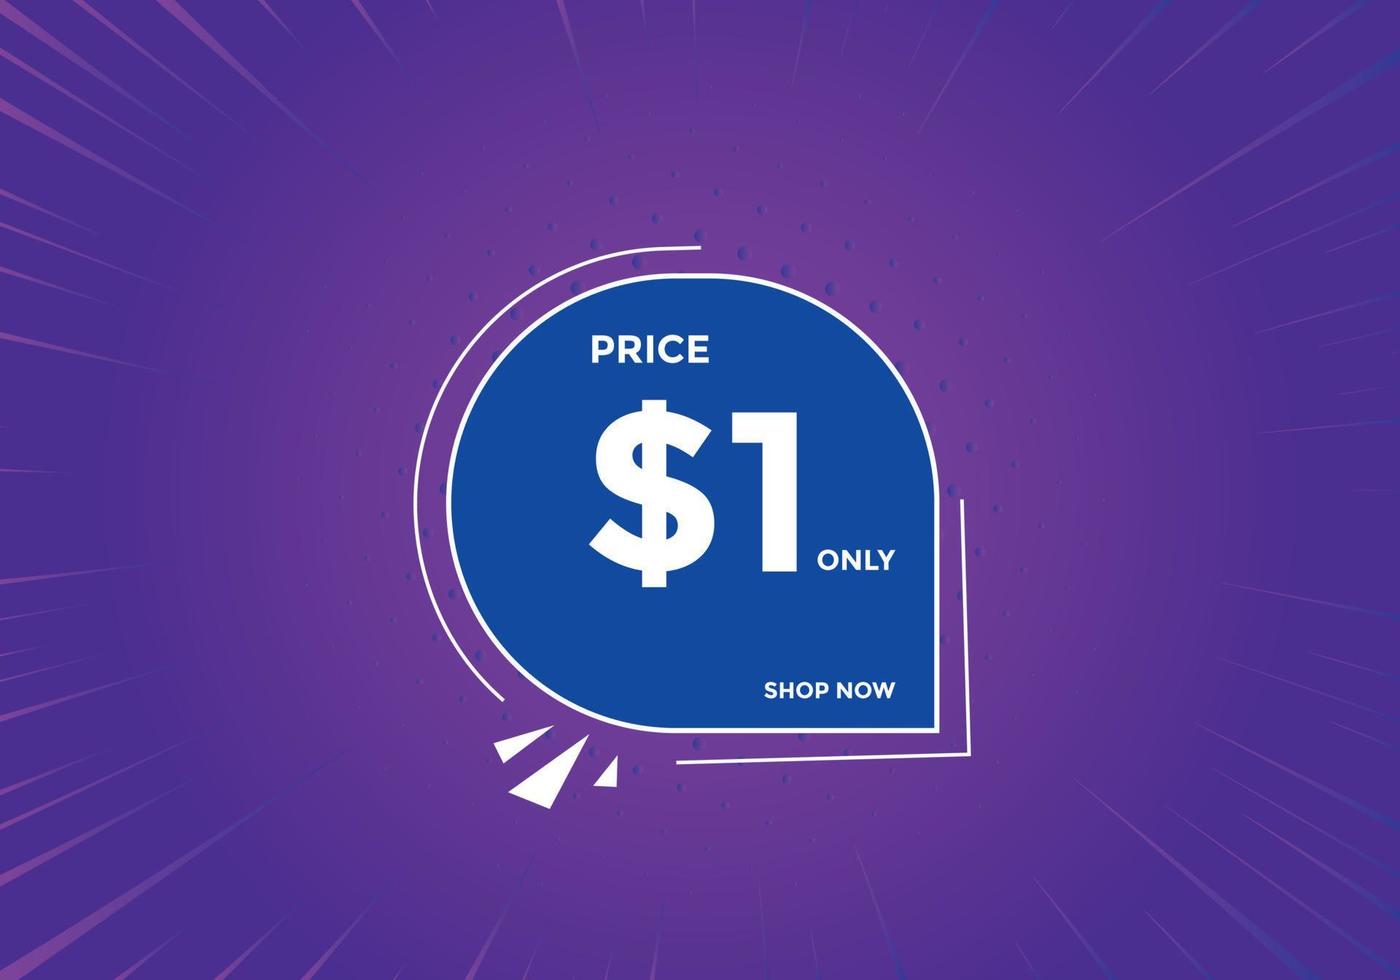 1 dollar price tag. Price 1 USD dollar only Sticker sale promotion Design. shop now button vector